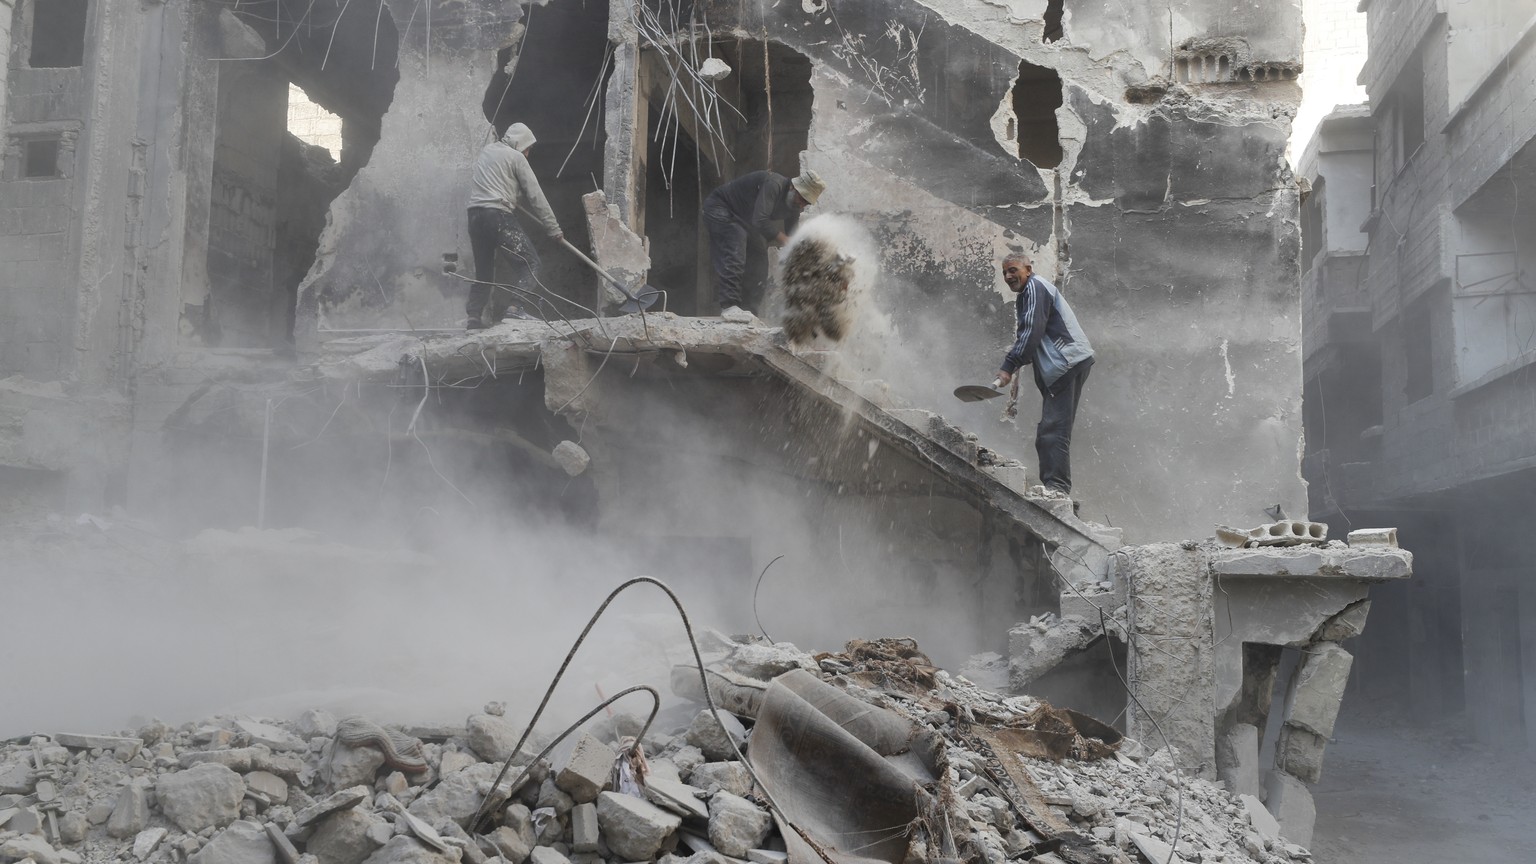 File - Workers clean up destruction h Yarmouk camp in Damascus Syria that has seen heavy fighting during the civil war, Wednesday, Nov. 2, 2022. A trickle of residents has returned to Yarmouk, the lar ...